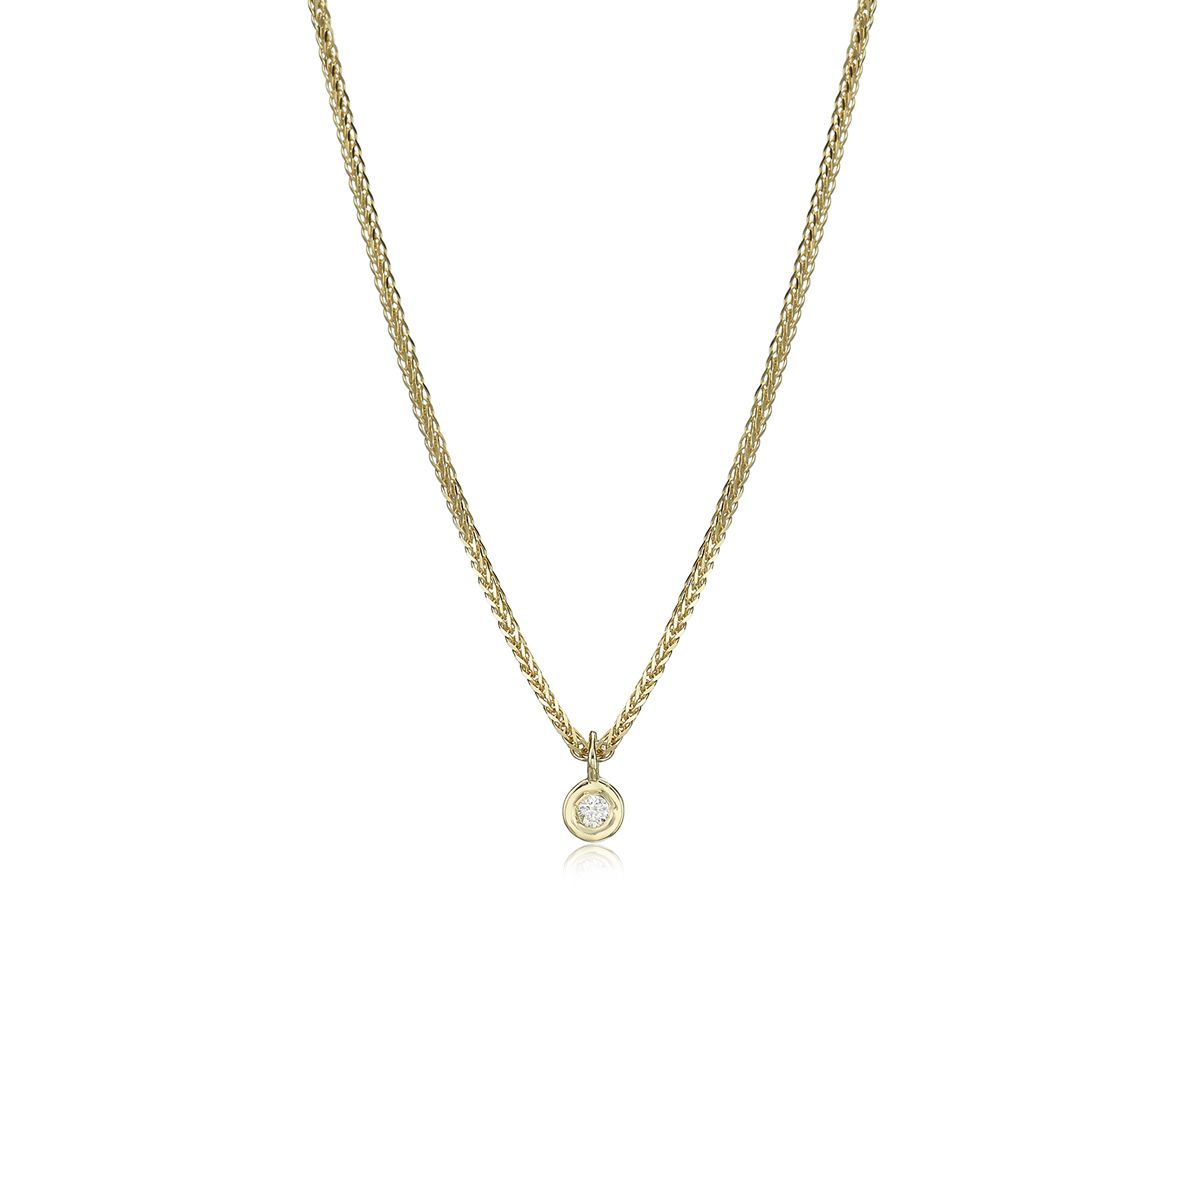 Delicate Diamond Necklace Throughout Most Recent Small Diamond Necklaces (View 5 of 25)